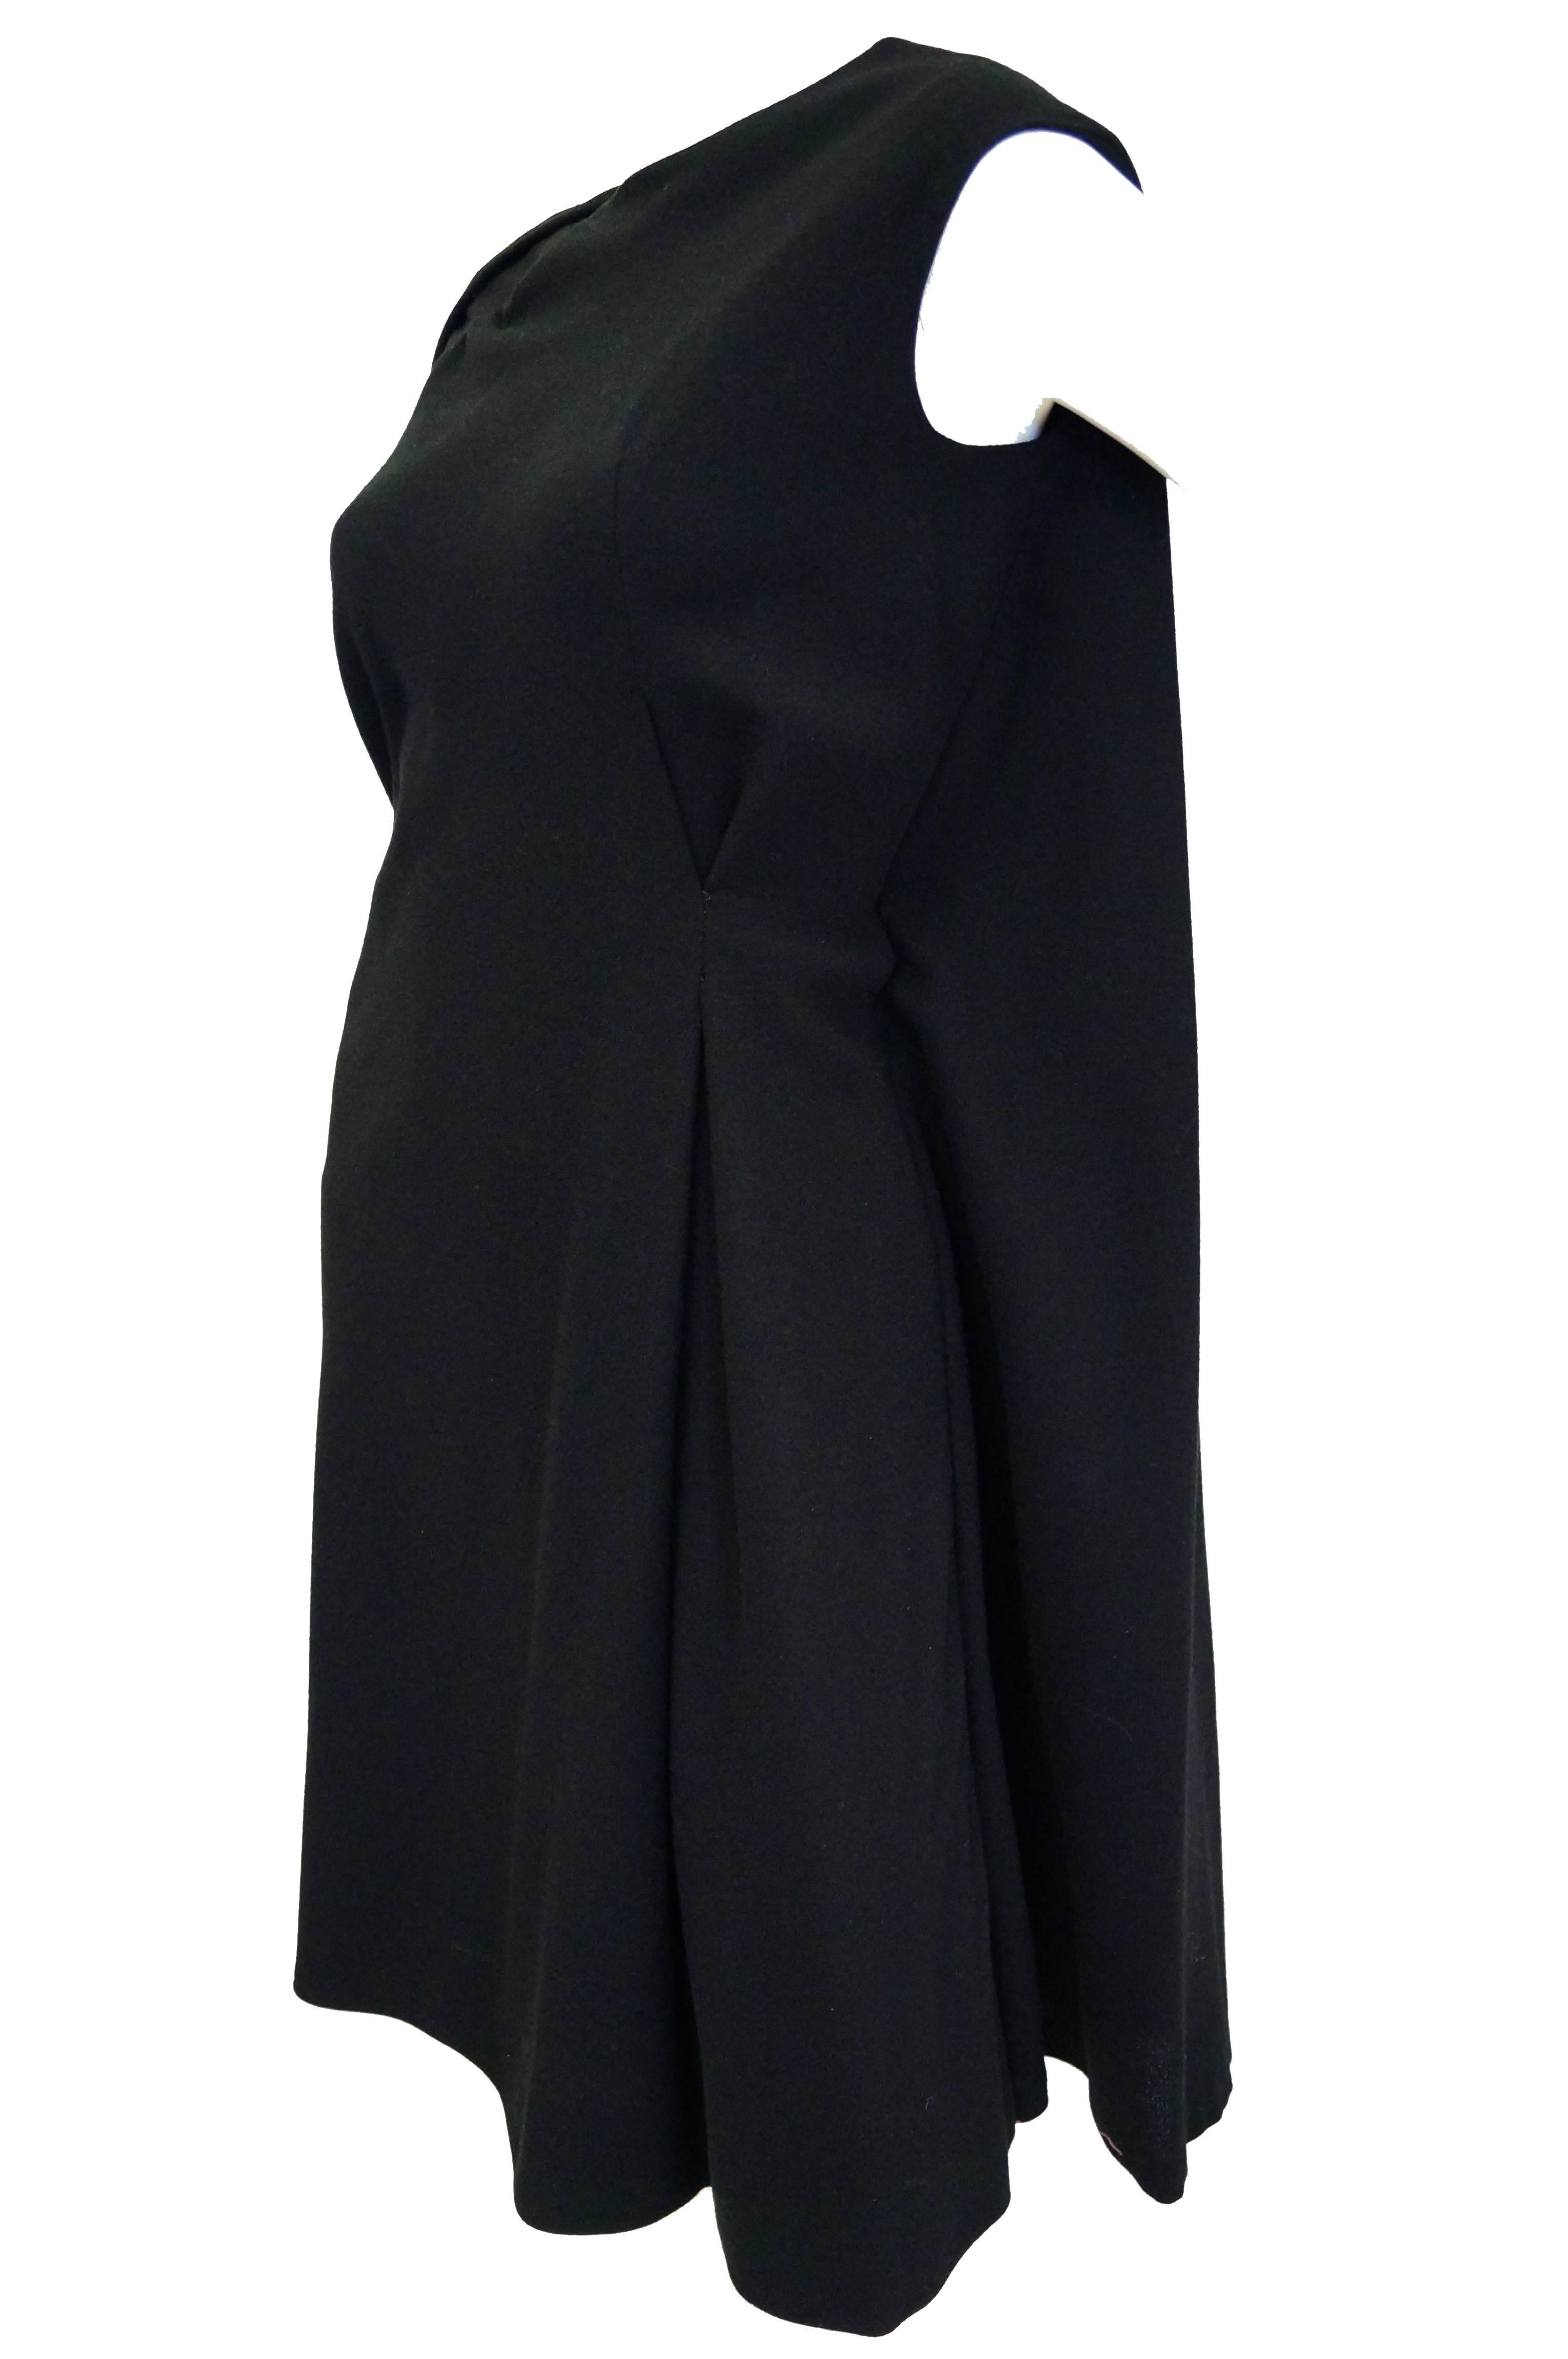 Fantastic black wool cape dress by John Moore! This dress sits just above the knee, has a jewel neckline, and short sleeves. The loose shift silhouette of the dress is interrupted by a fine and precise pleat on the hip. The dress has a fabulous cape